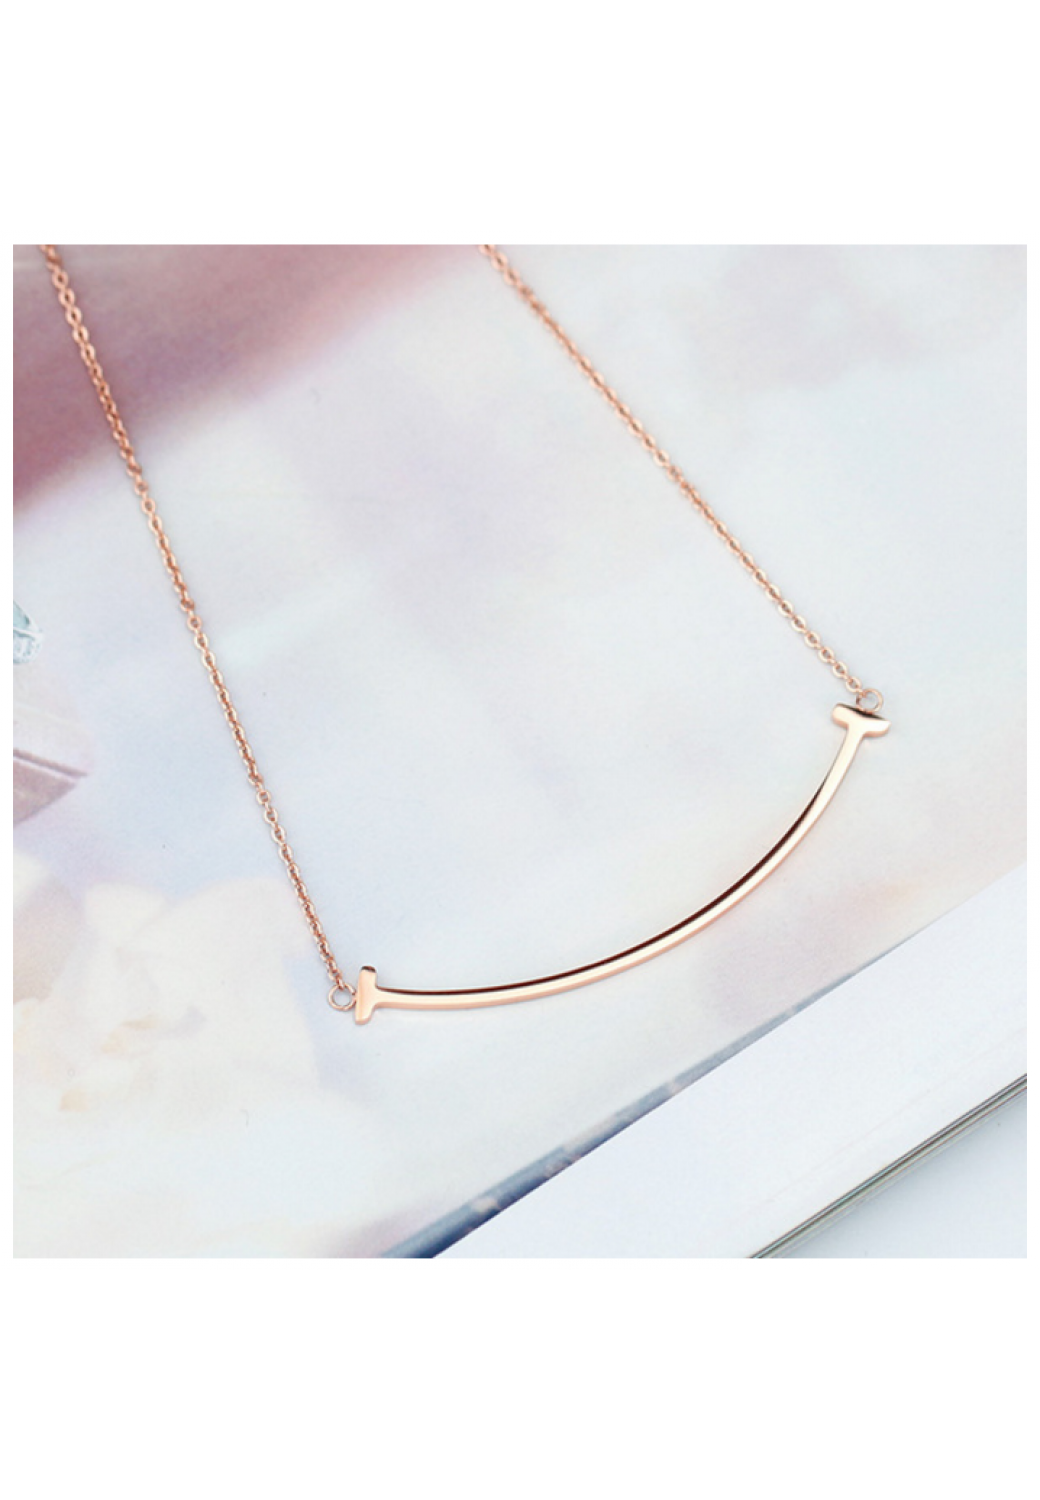 NECKLACE-15-ROSE GOLD